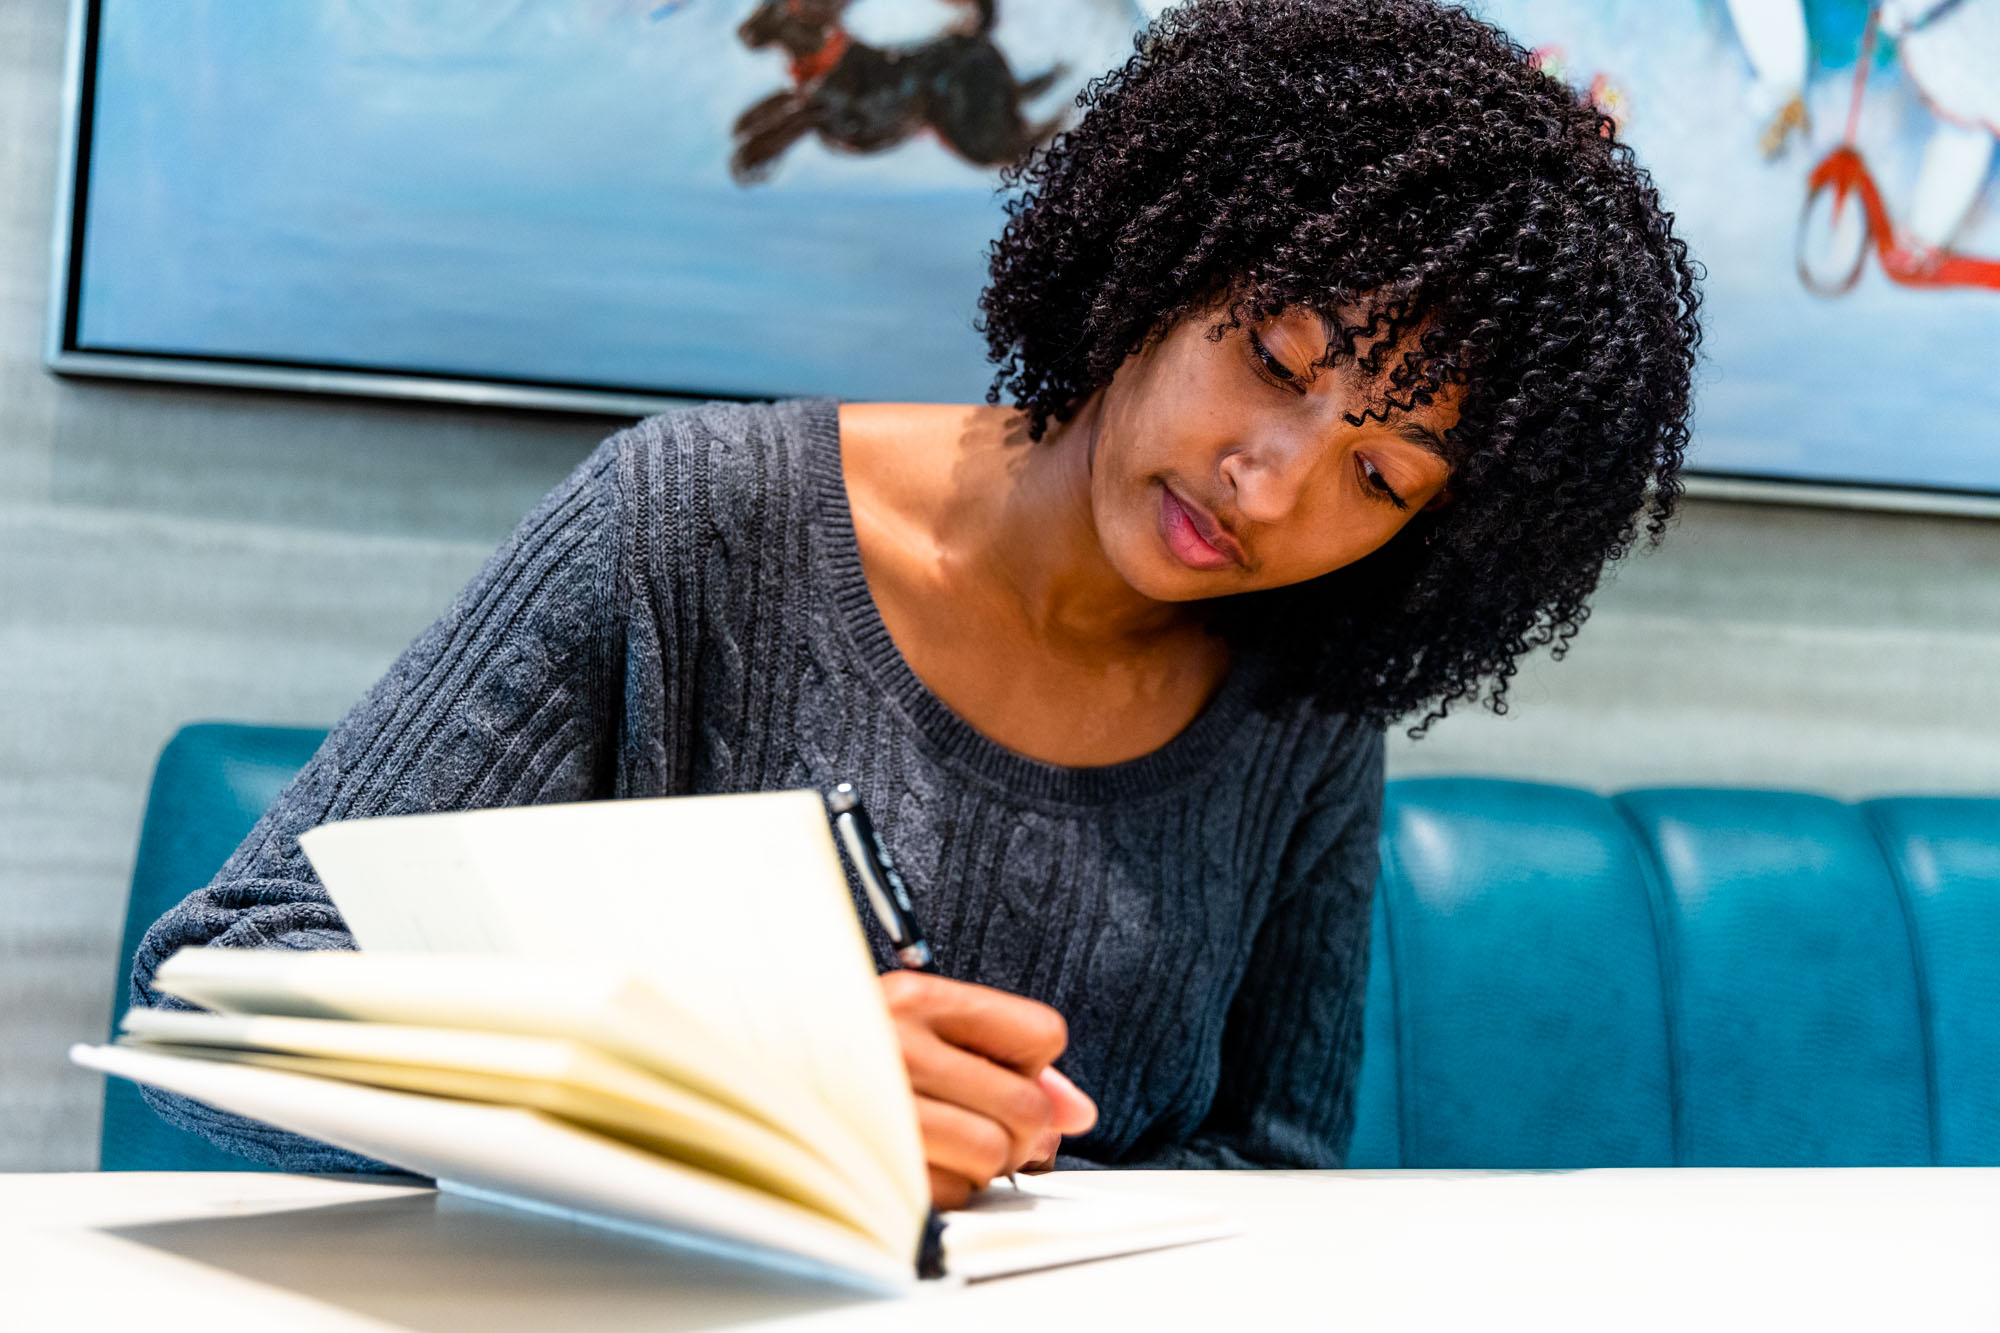 Young black woman writing in a notebook during a professional development program